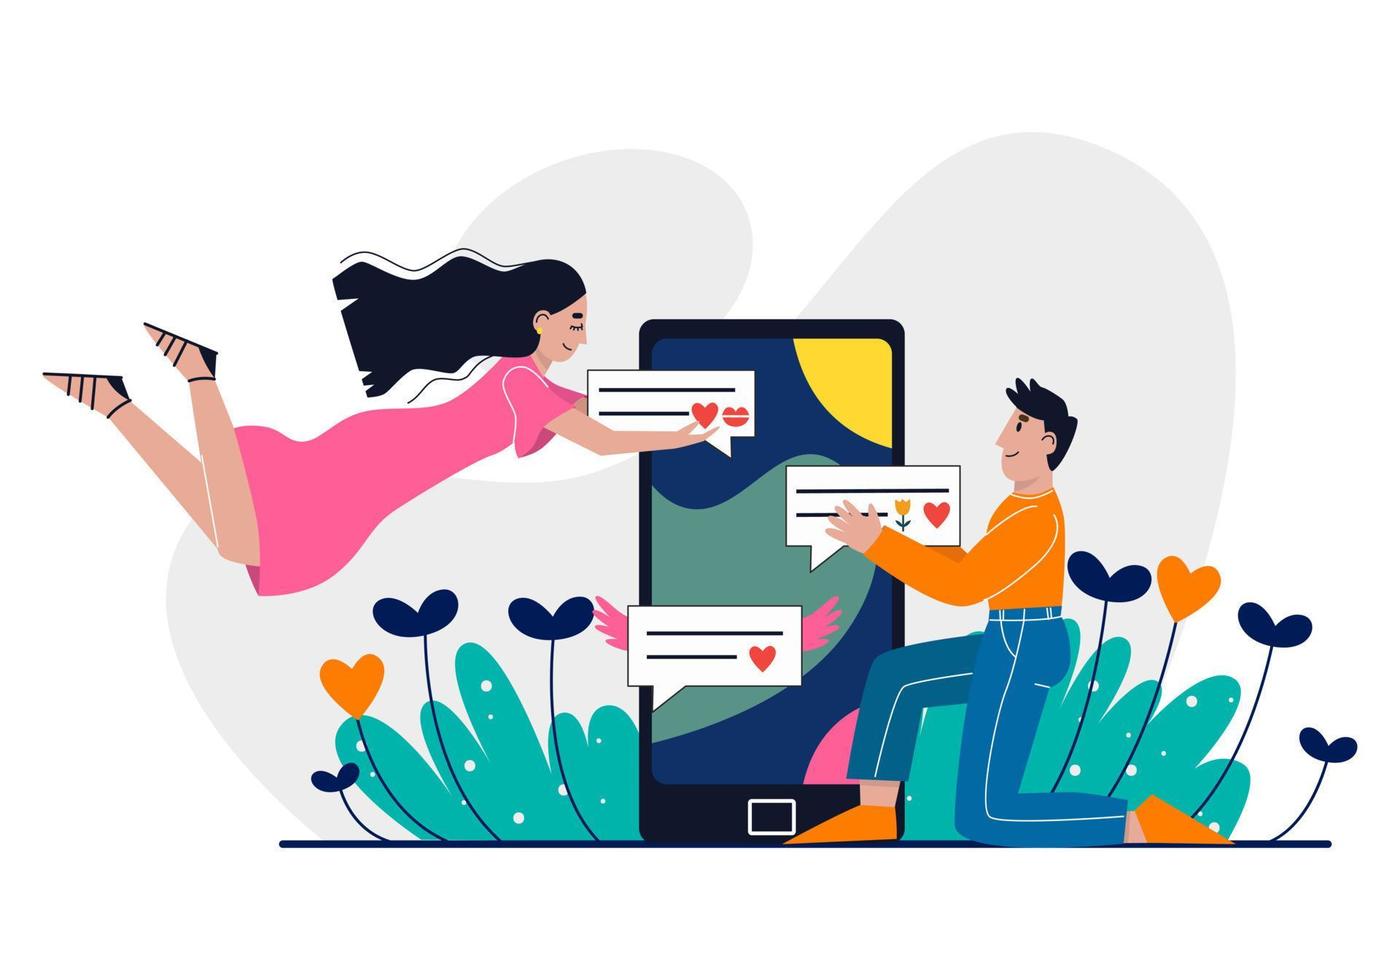 Man and woman chatting online. Online dating. Virtual relationships concept. Love trough internet. Flat vector illustration.